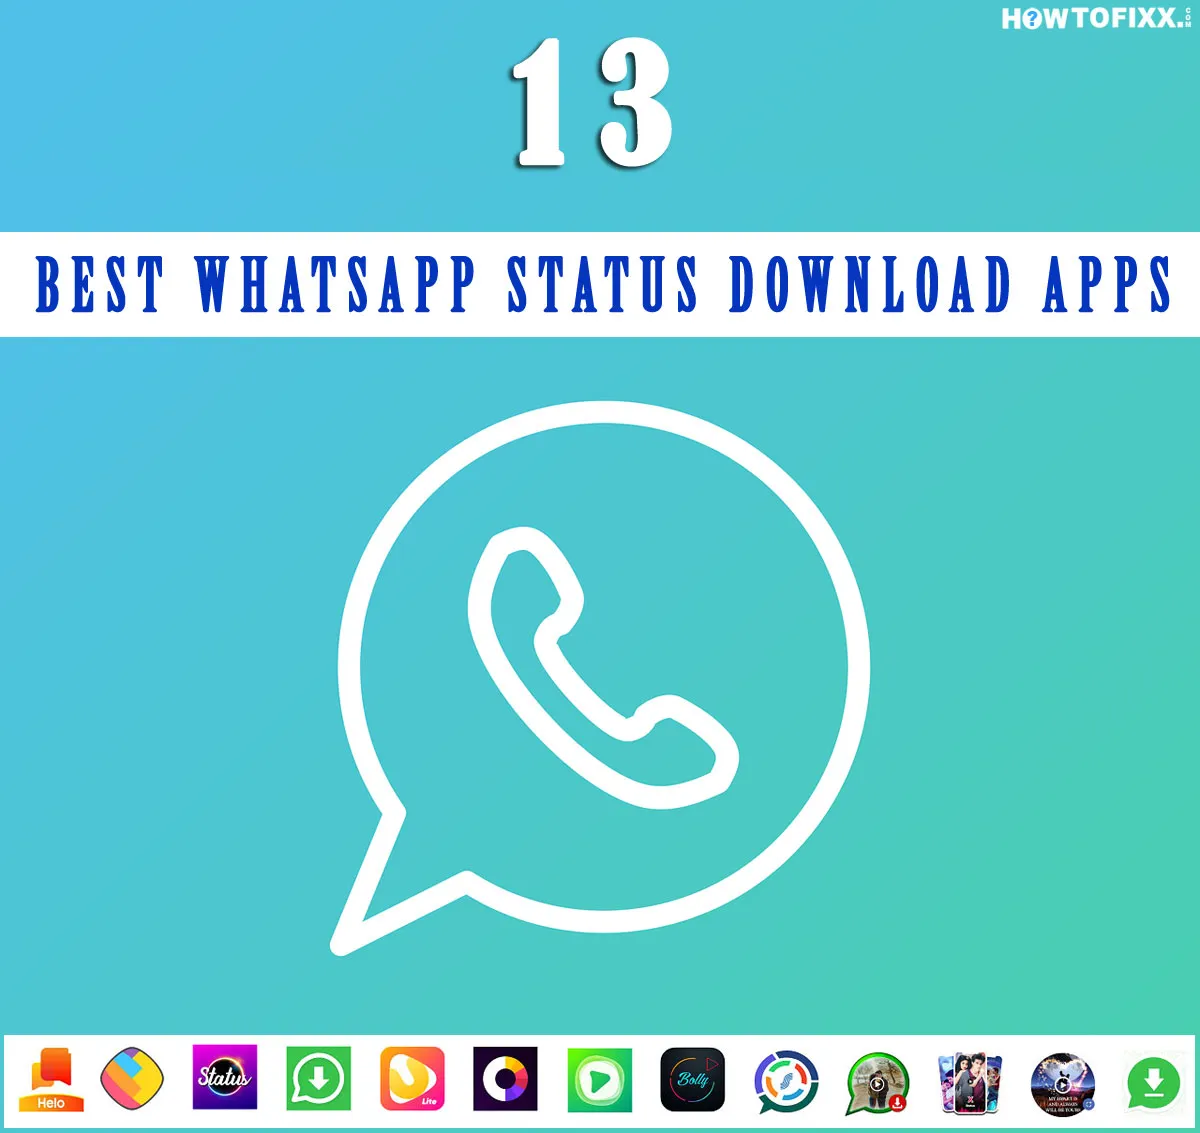 13 Best Whatsapp Status Download App for (Android & iOS)